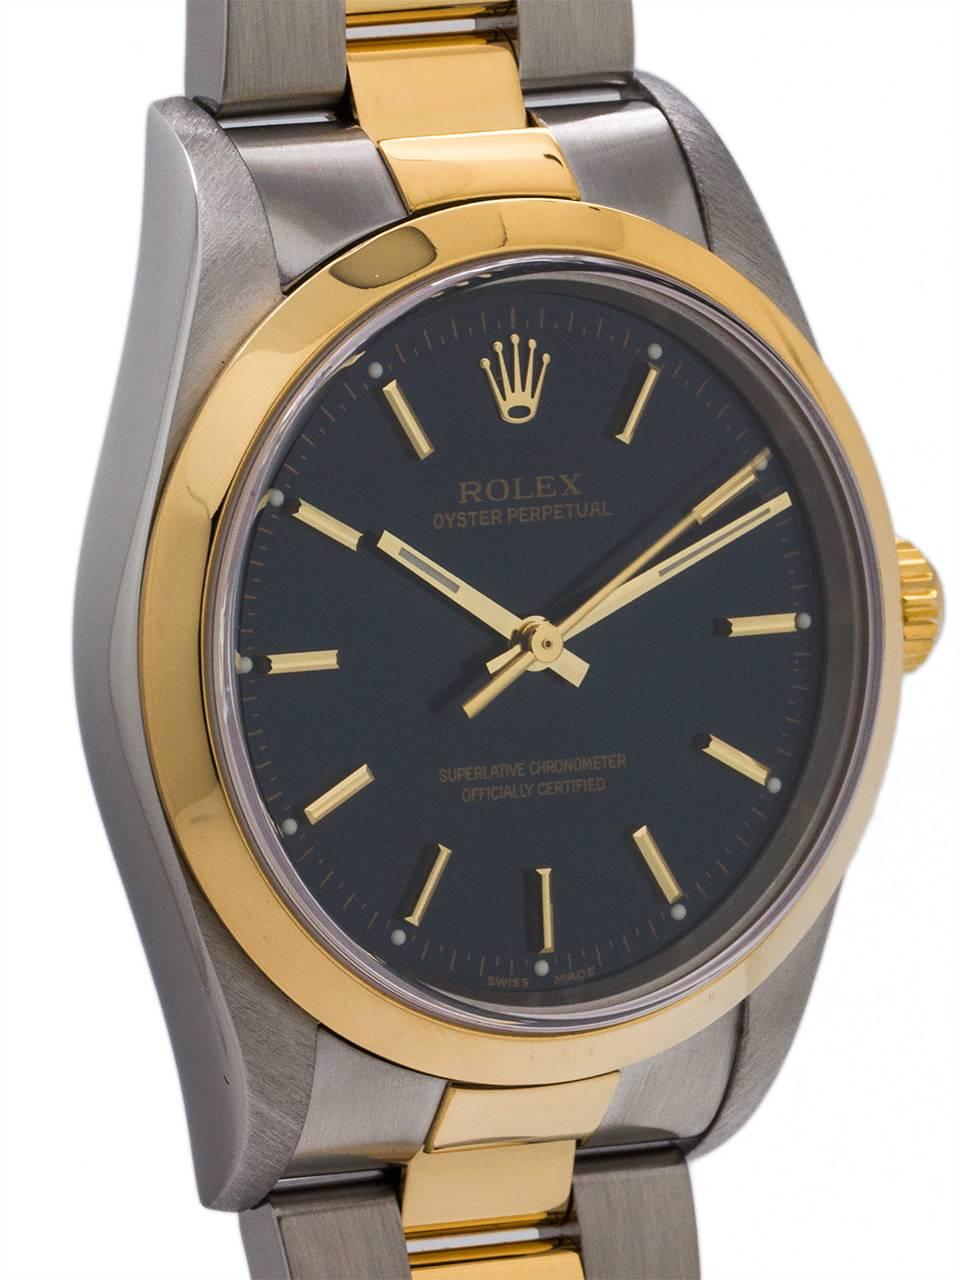 Modern Rolex Yellow Gold Stainless Steel Oyster Perpetual Wristwatch, circa 2003